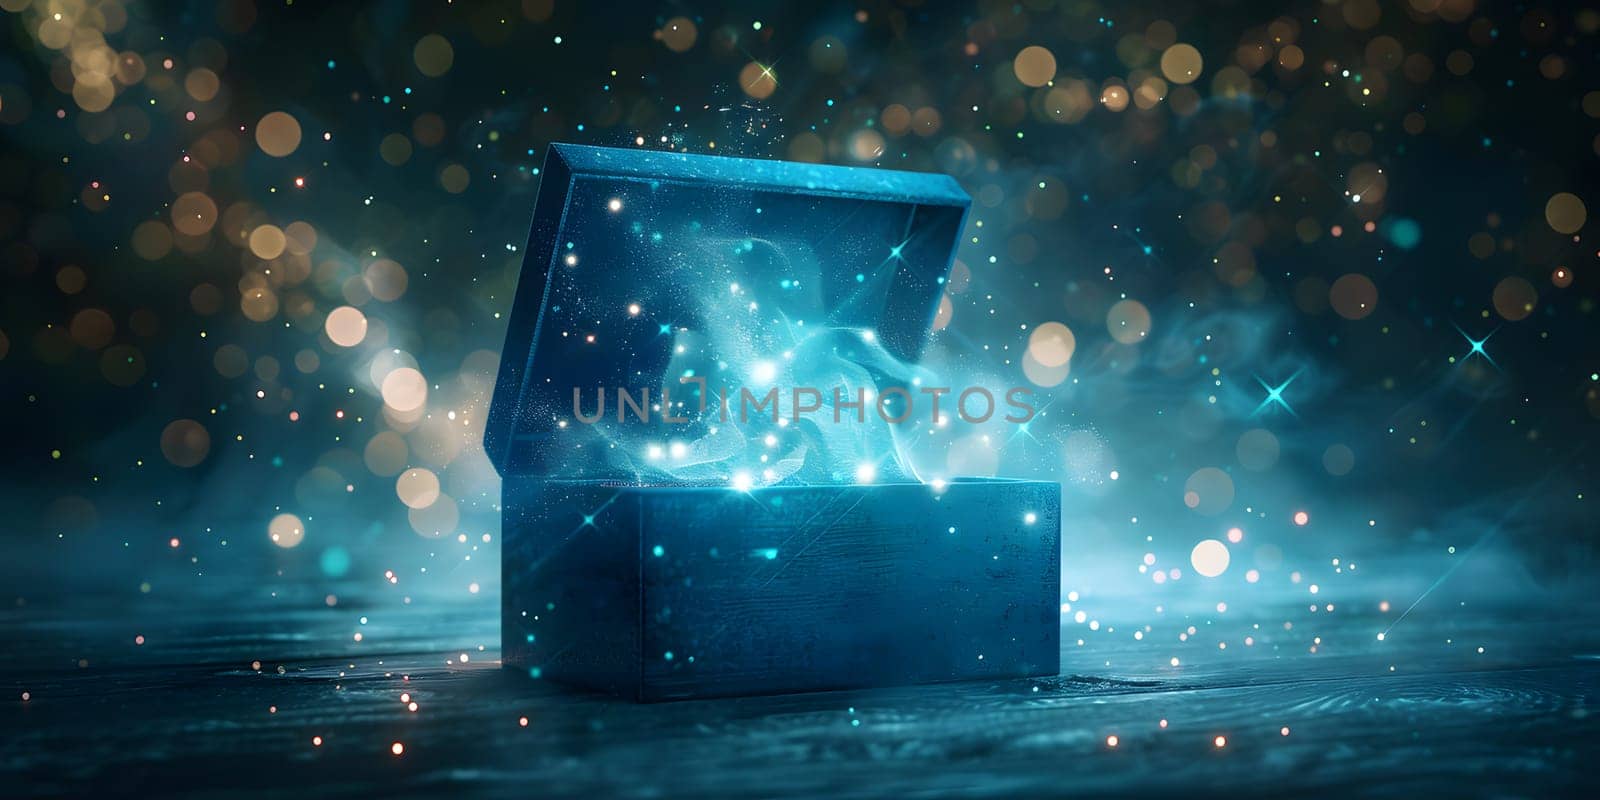 open pandora's box with green smoke on a wooden background high contrast image . High quality photo